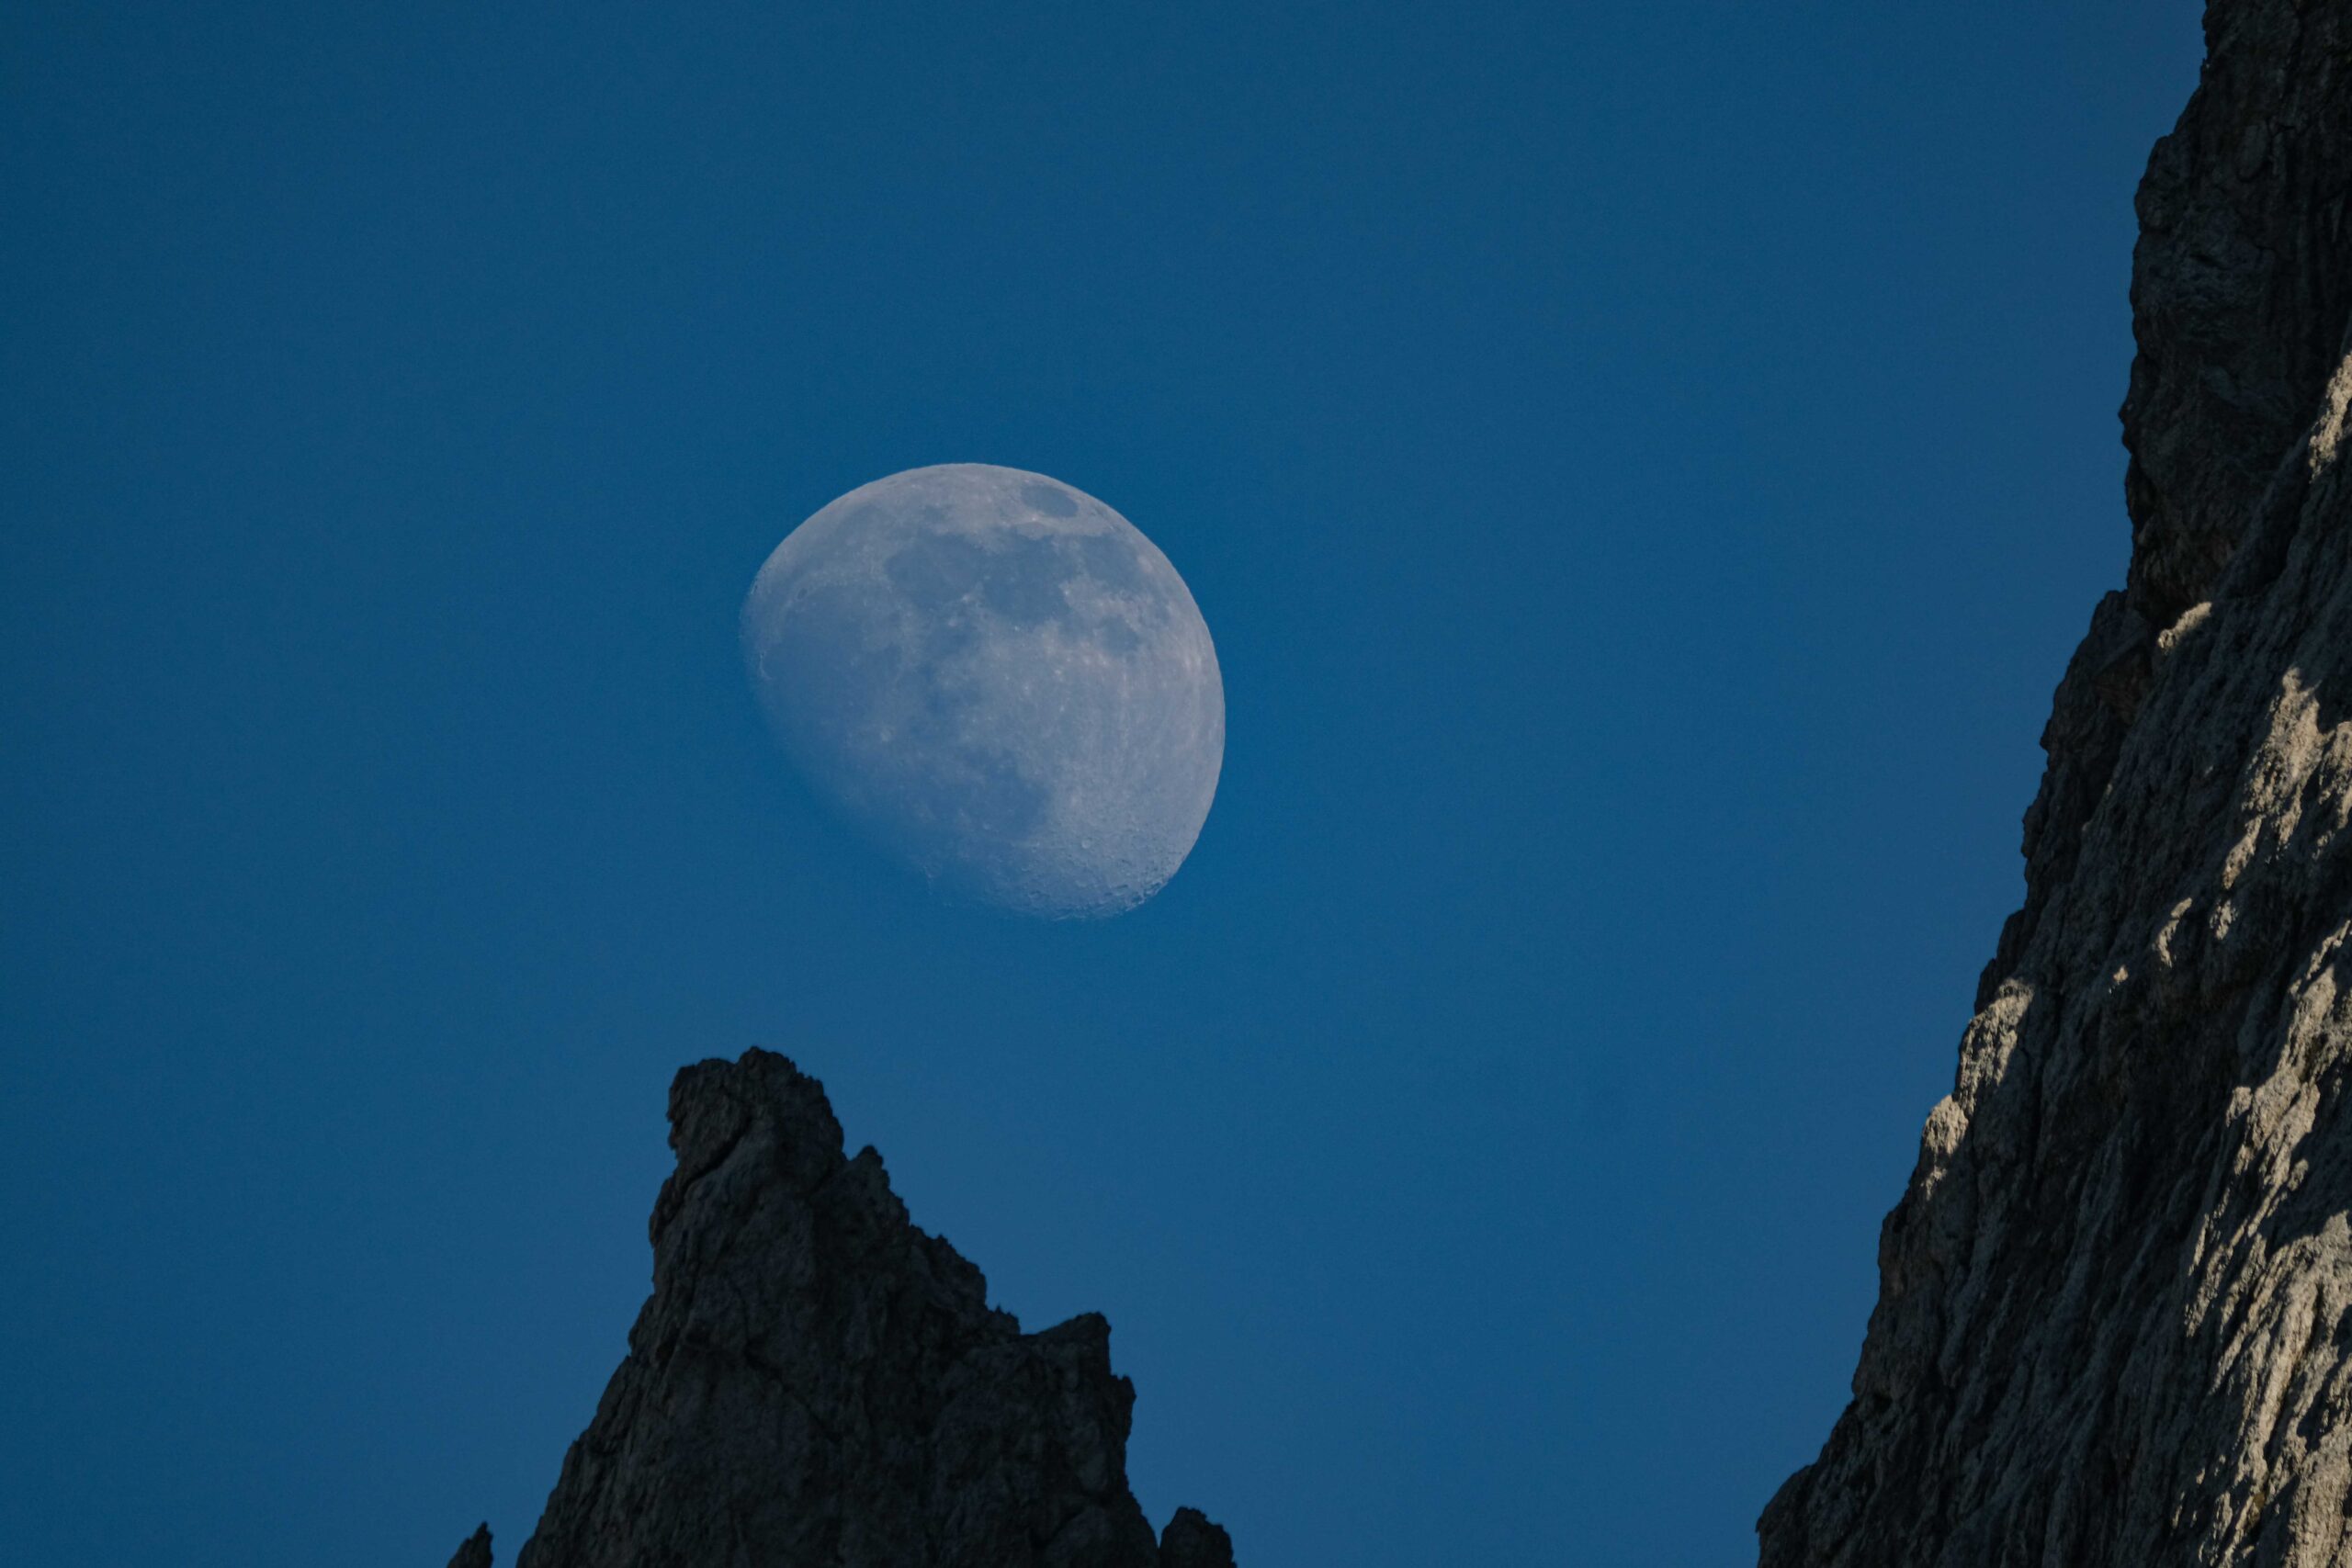 A waxing moon over rocky hills